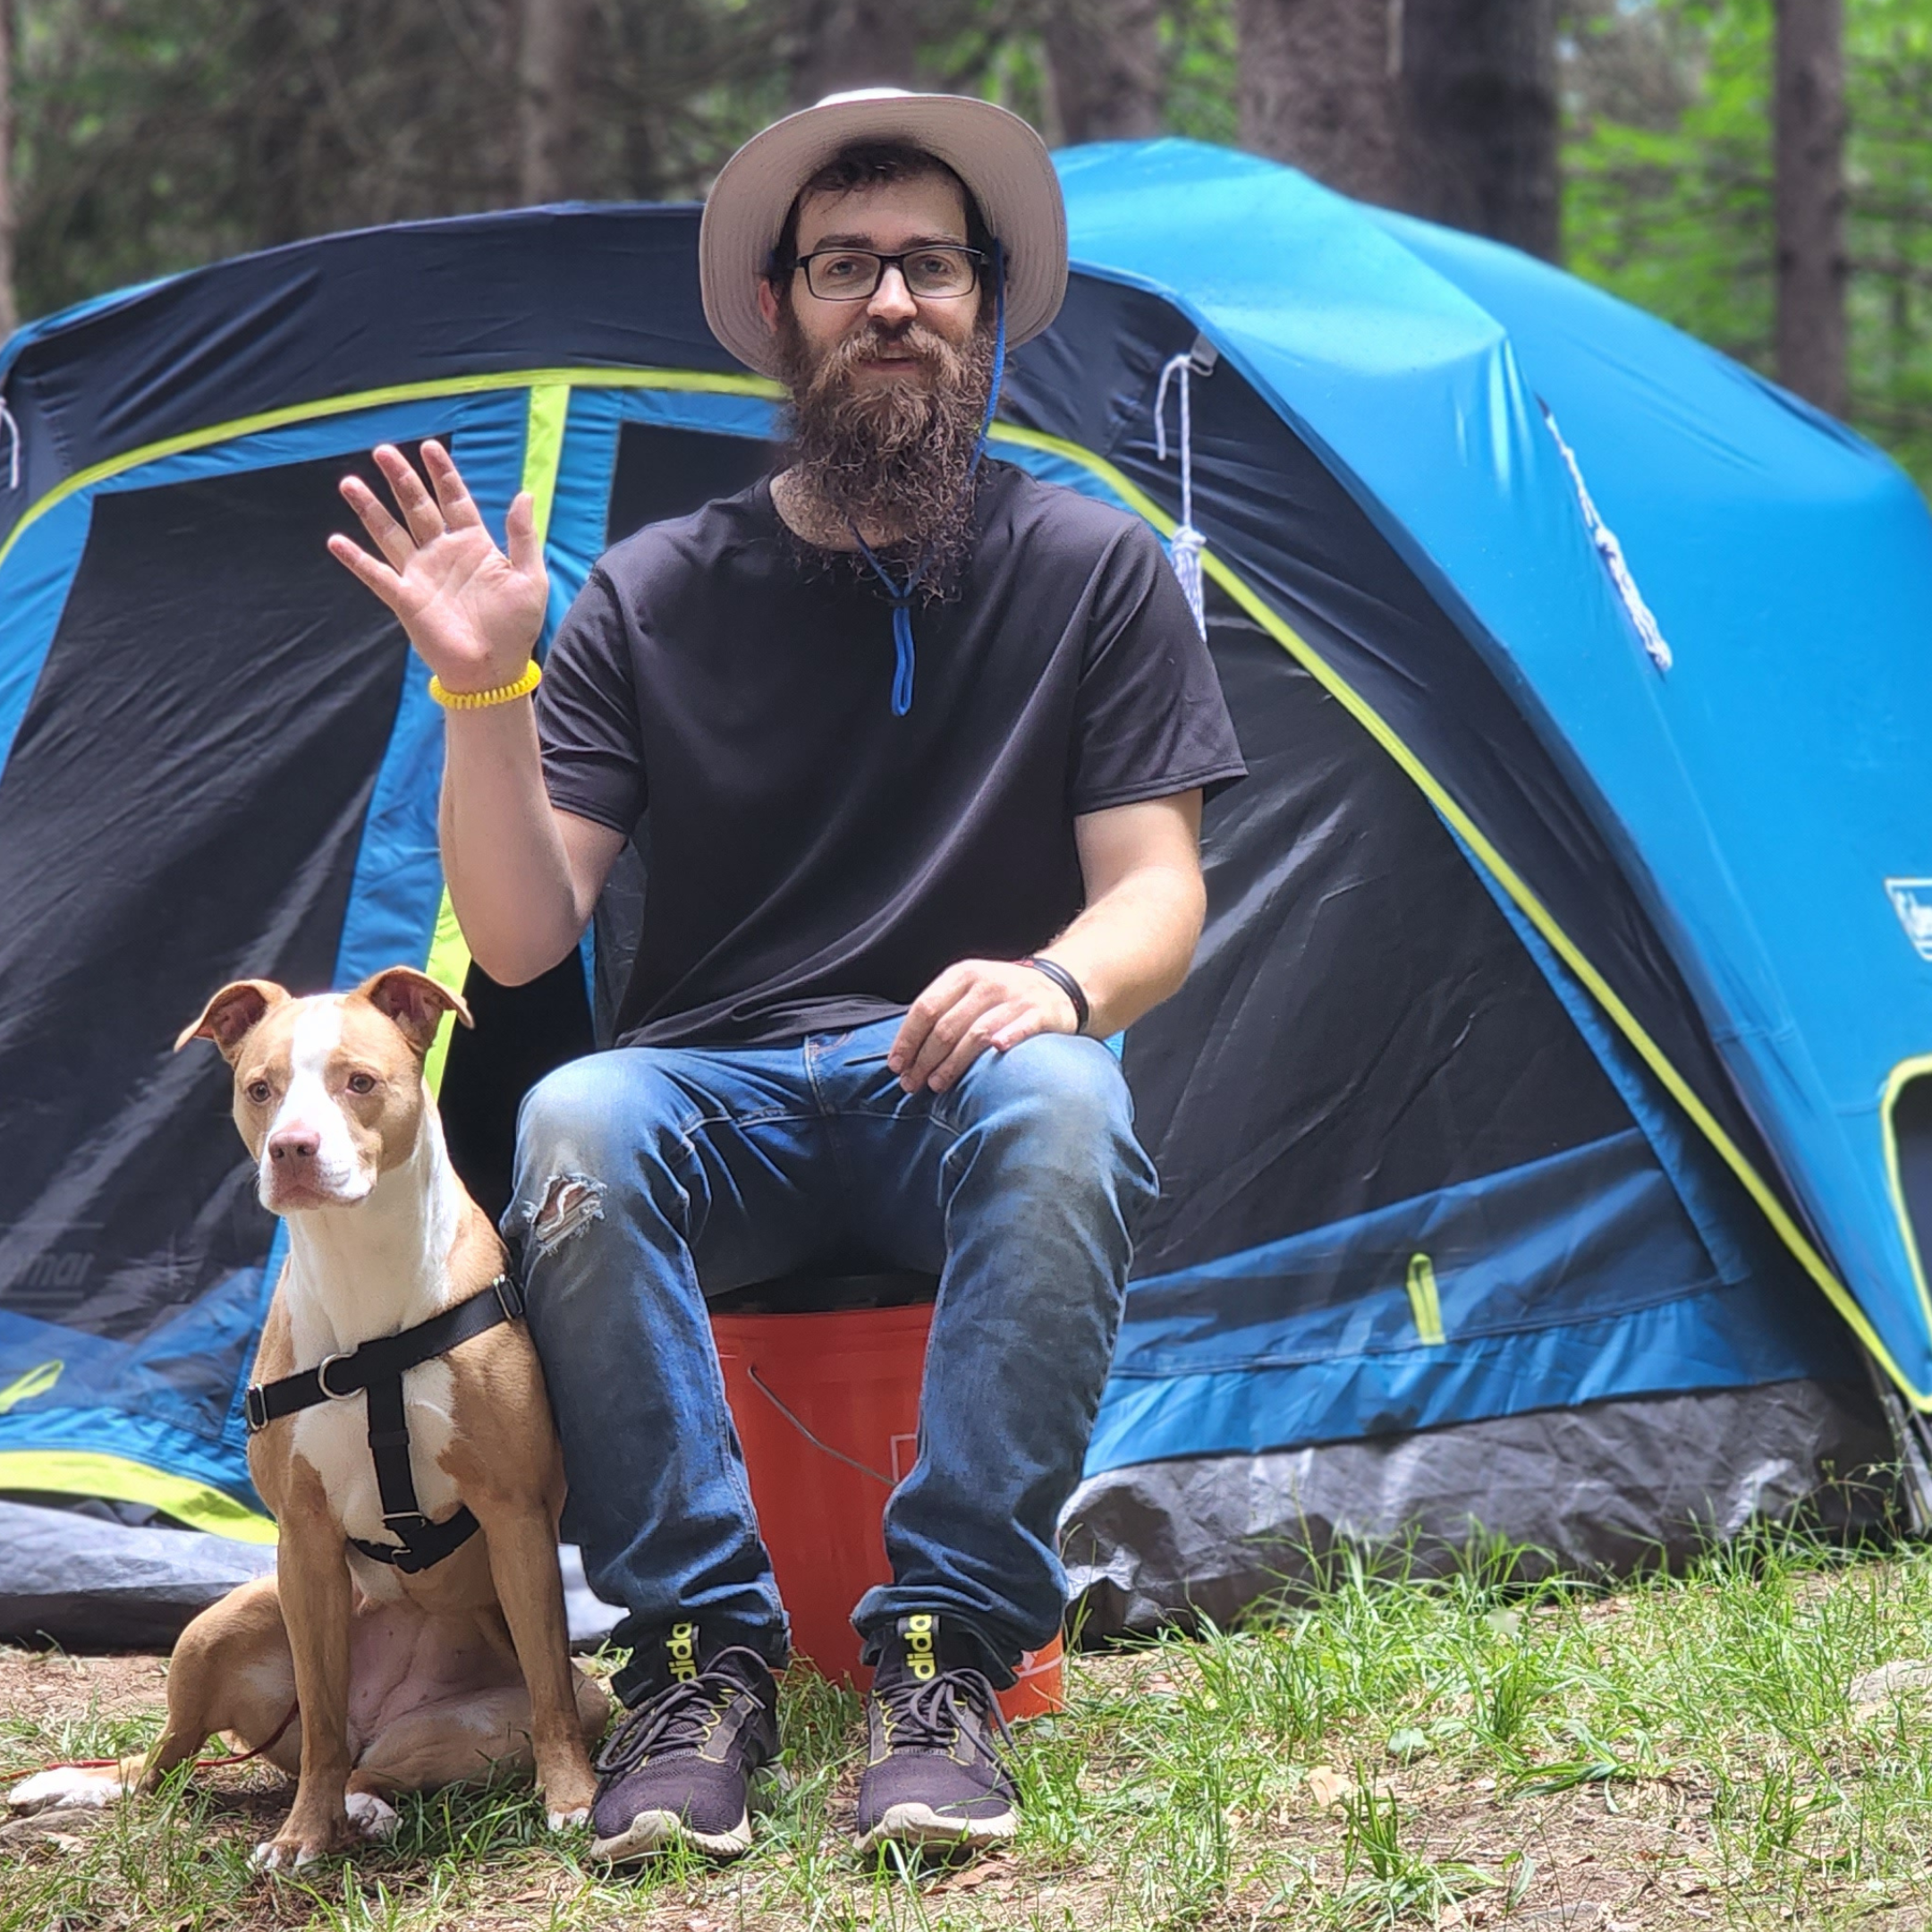 The image shows a bearded man wearing a hat sitting in front of a blue tent. The man is waving and holding the leash of his light brown and white pitbull boxer mix dog, also pictured.